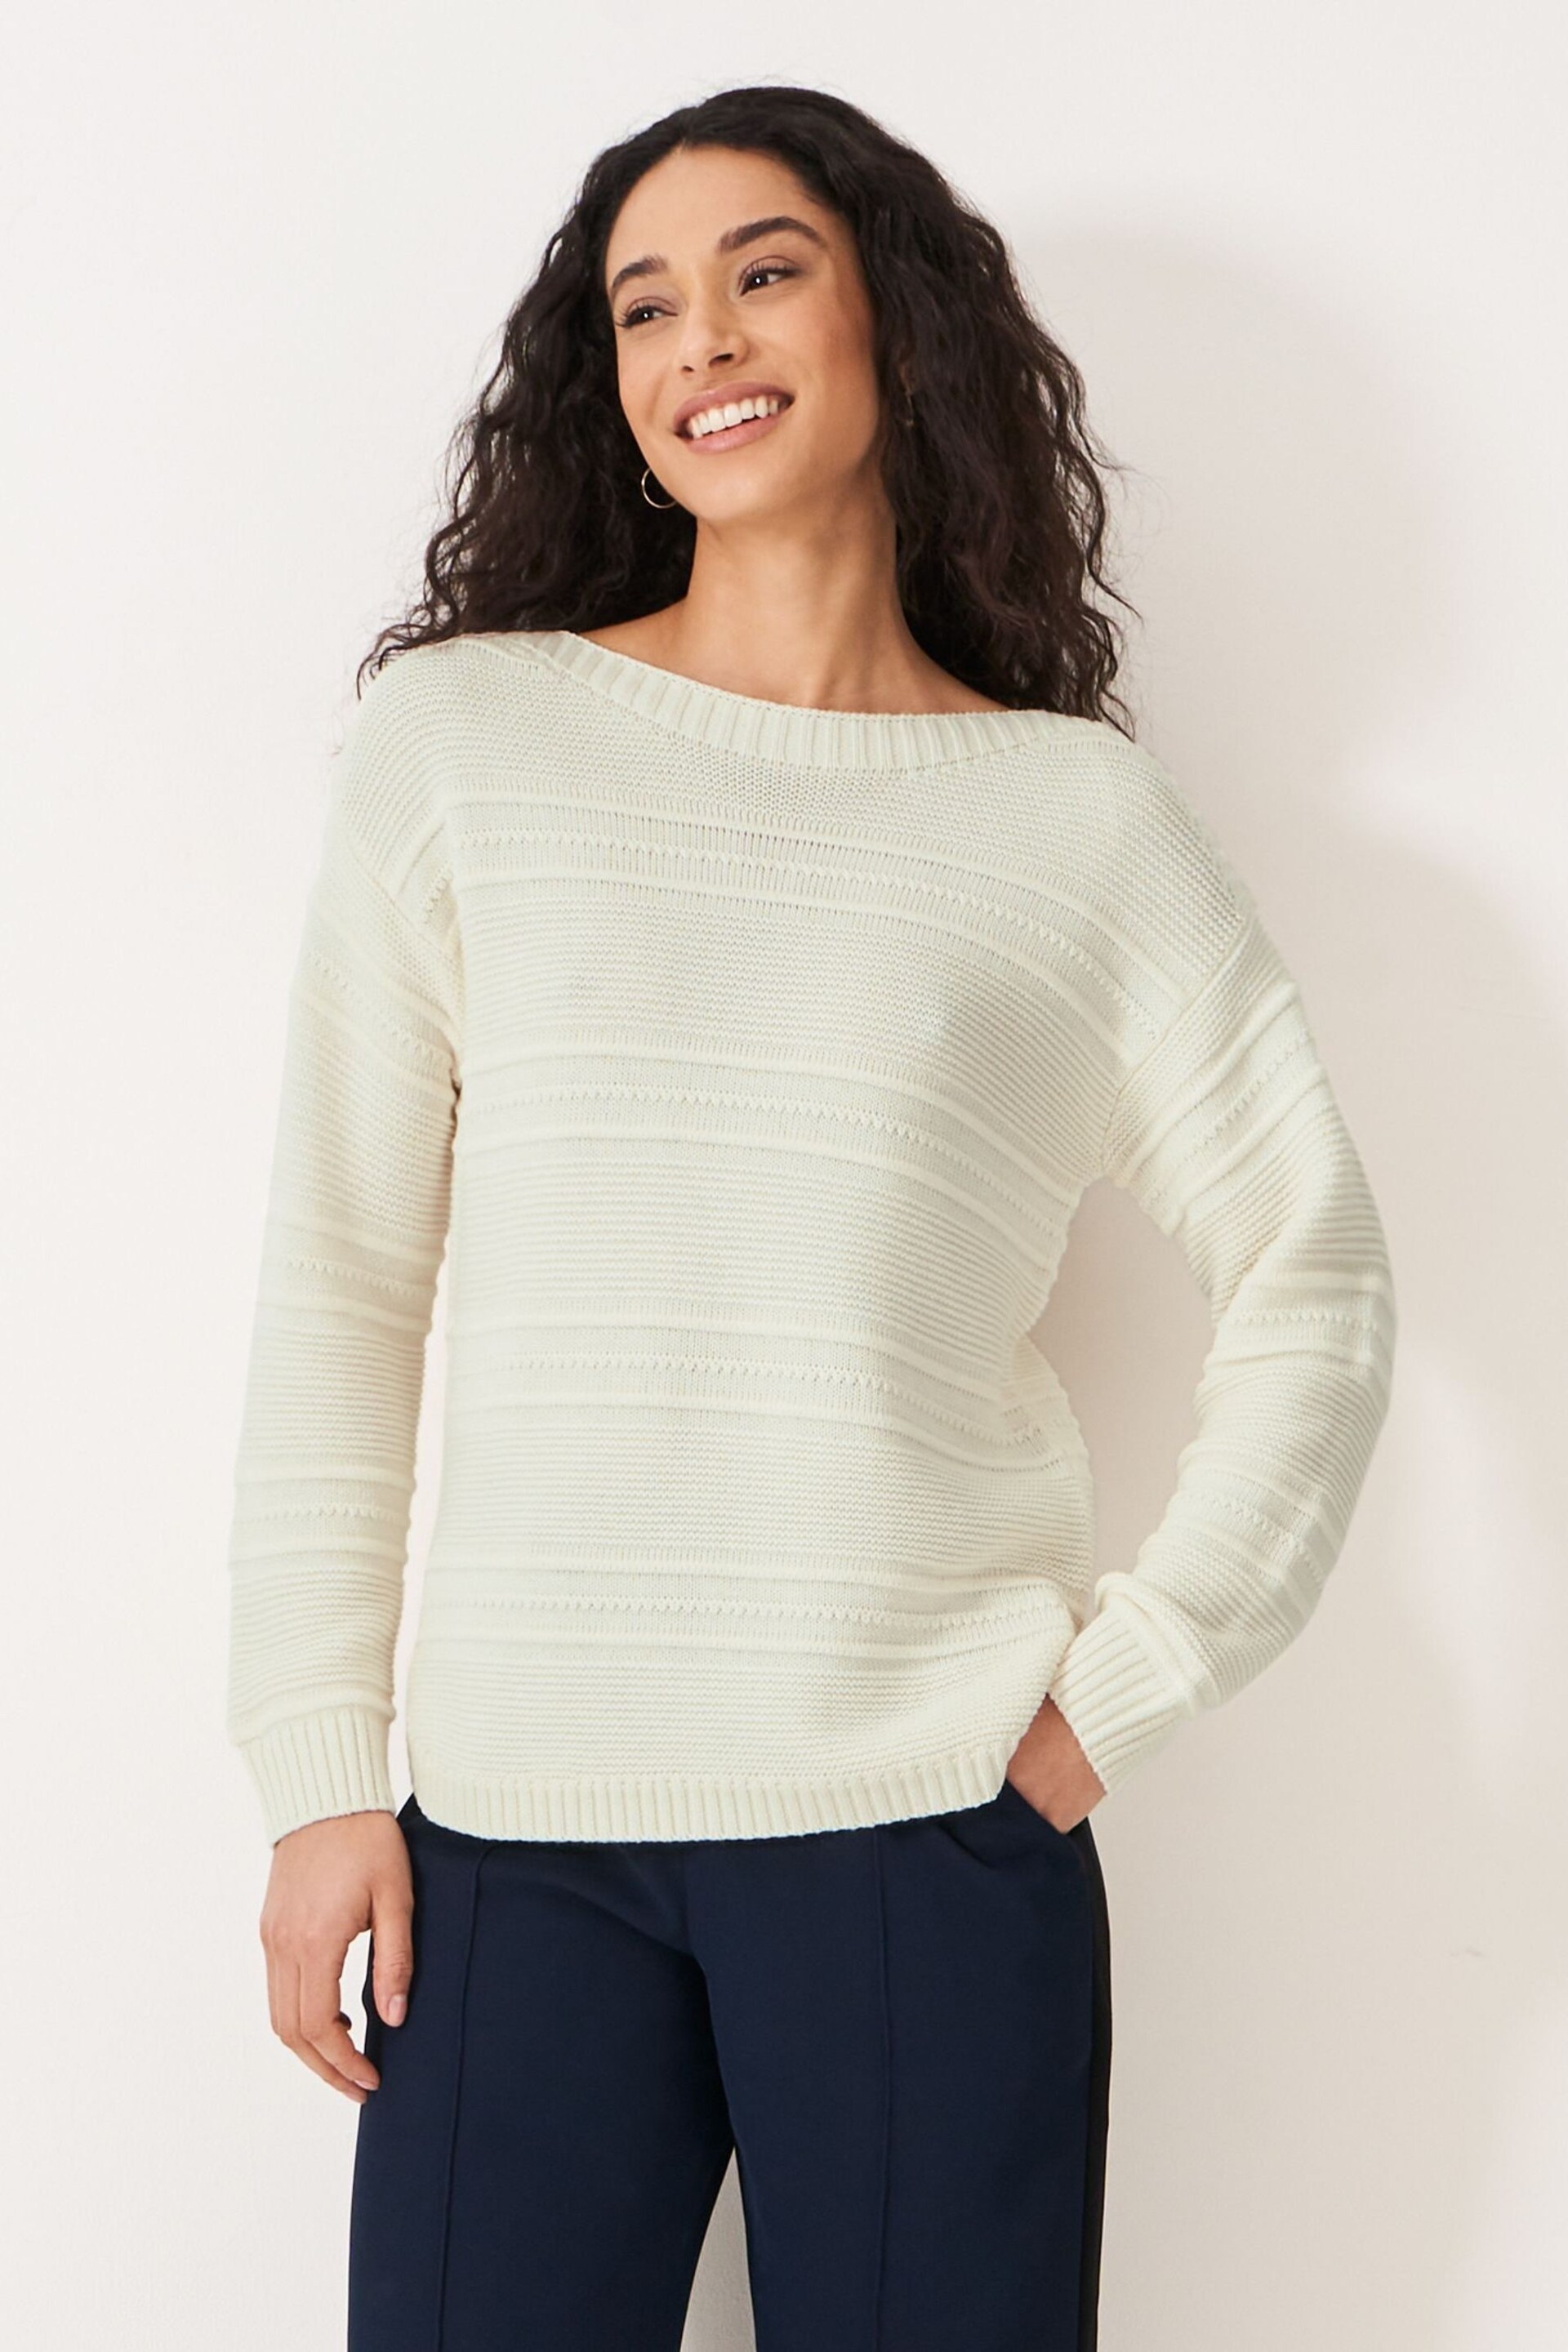 Crew Clothing Tali Knit Jumper - Image 1 of 5